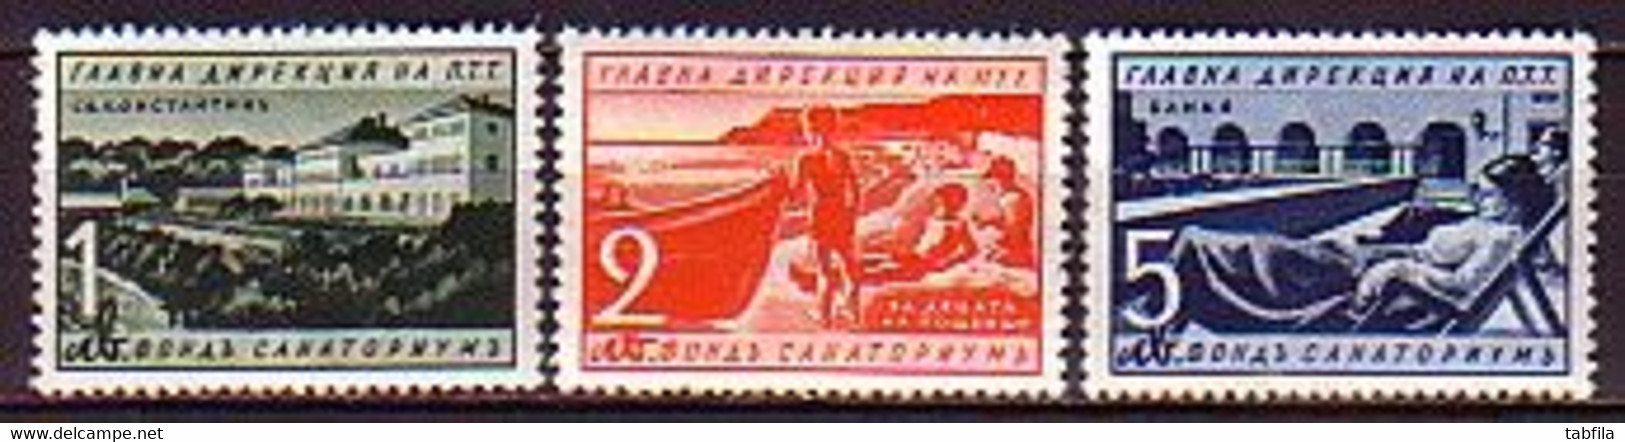 BULGARIA - 1939 - Timbres Par Expres - Yv 21/23 ** MNH - Express Stamps